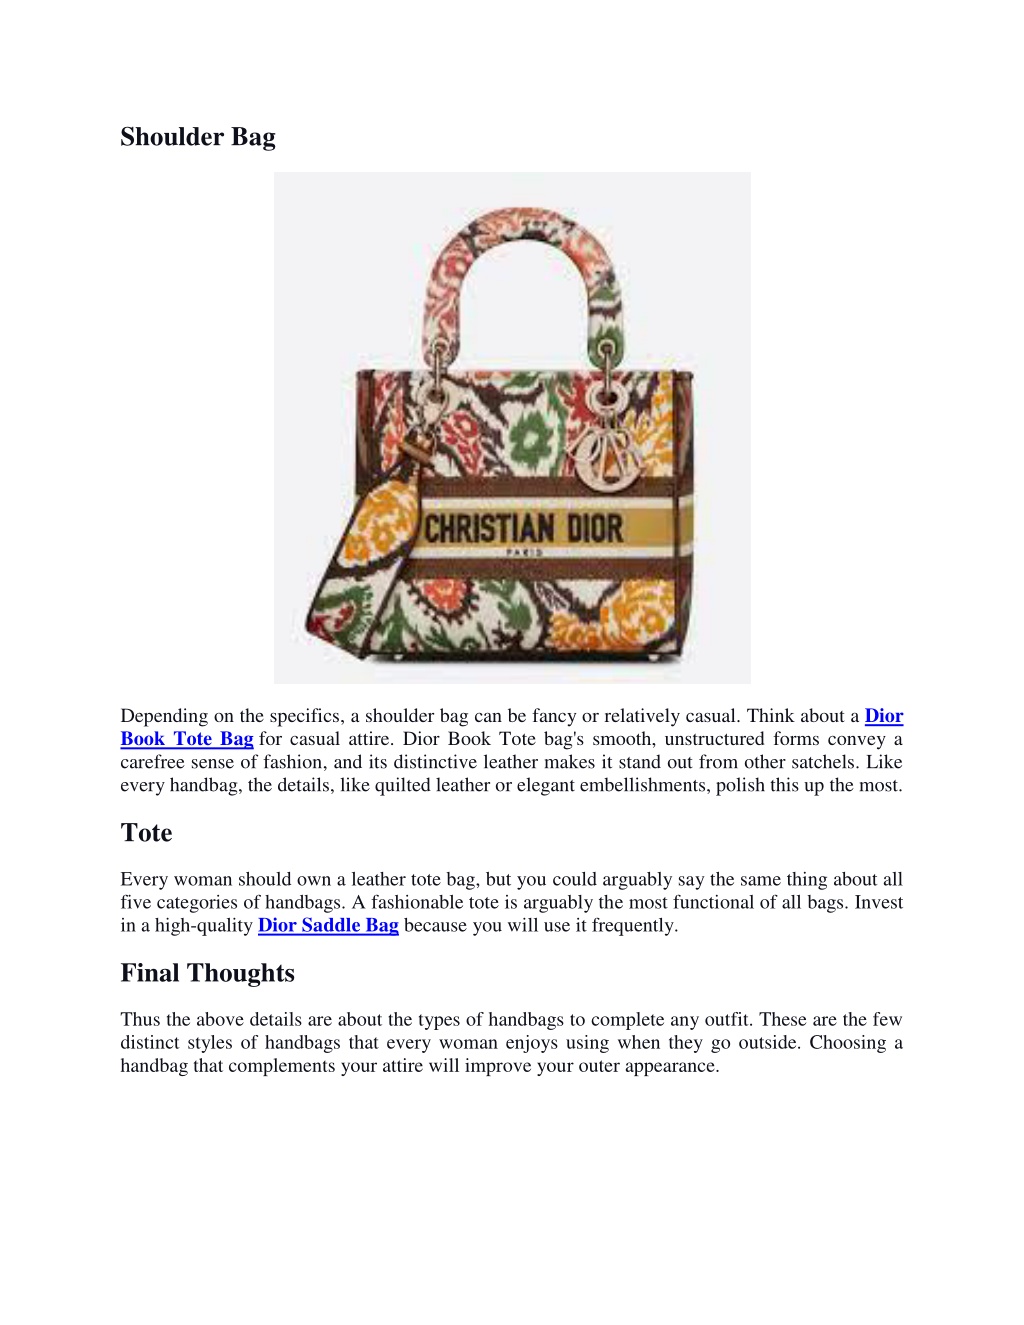 PPT - Various Types of Handbags to Complete Any Outfit PowerPoint ...